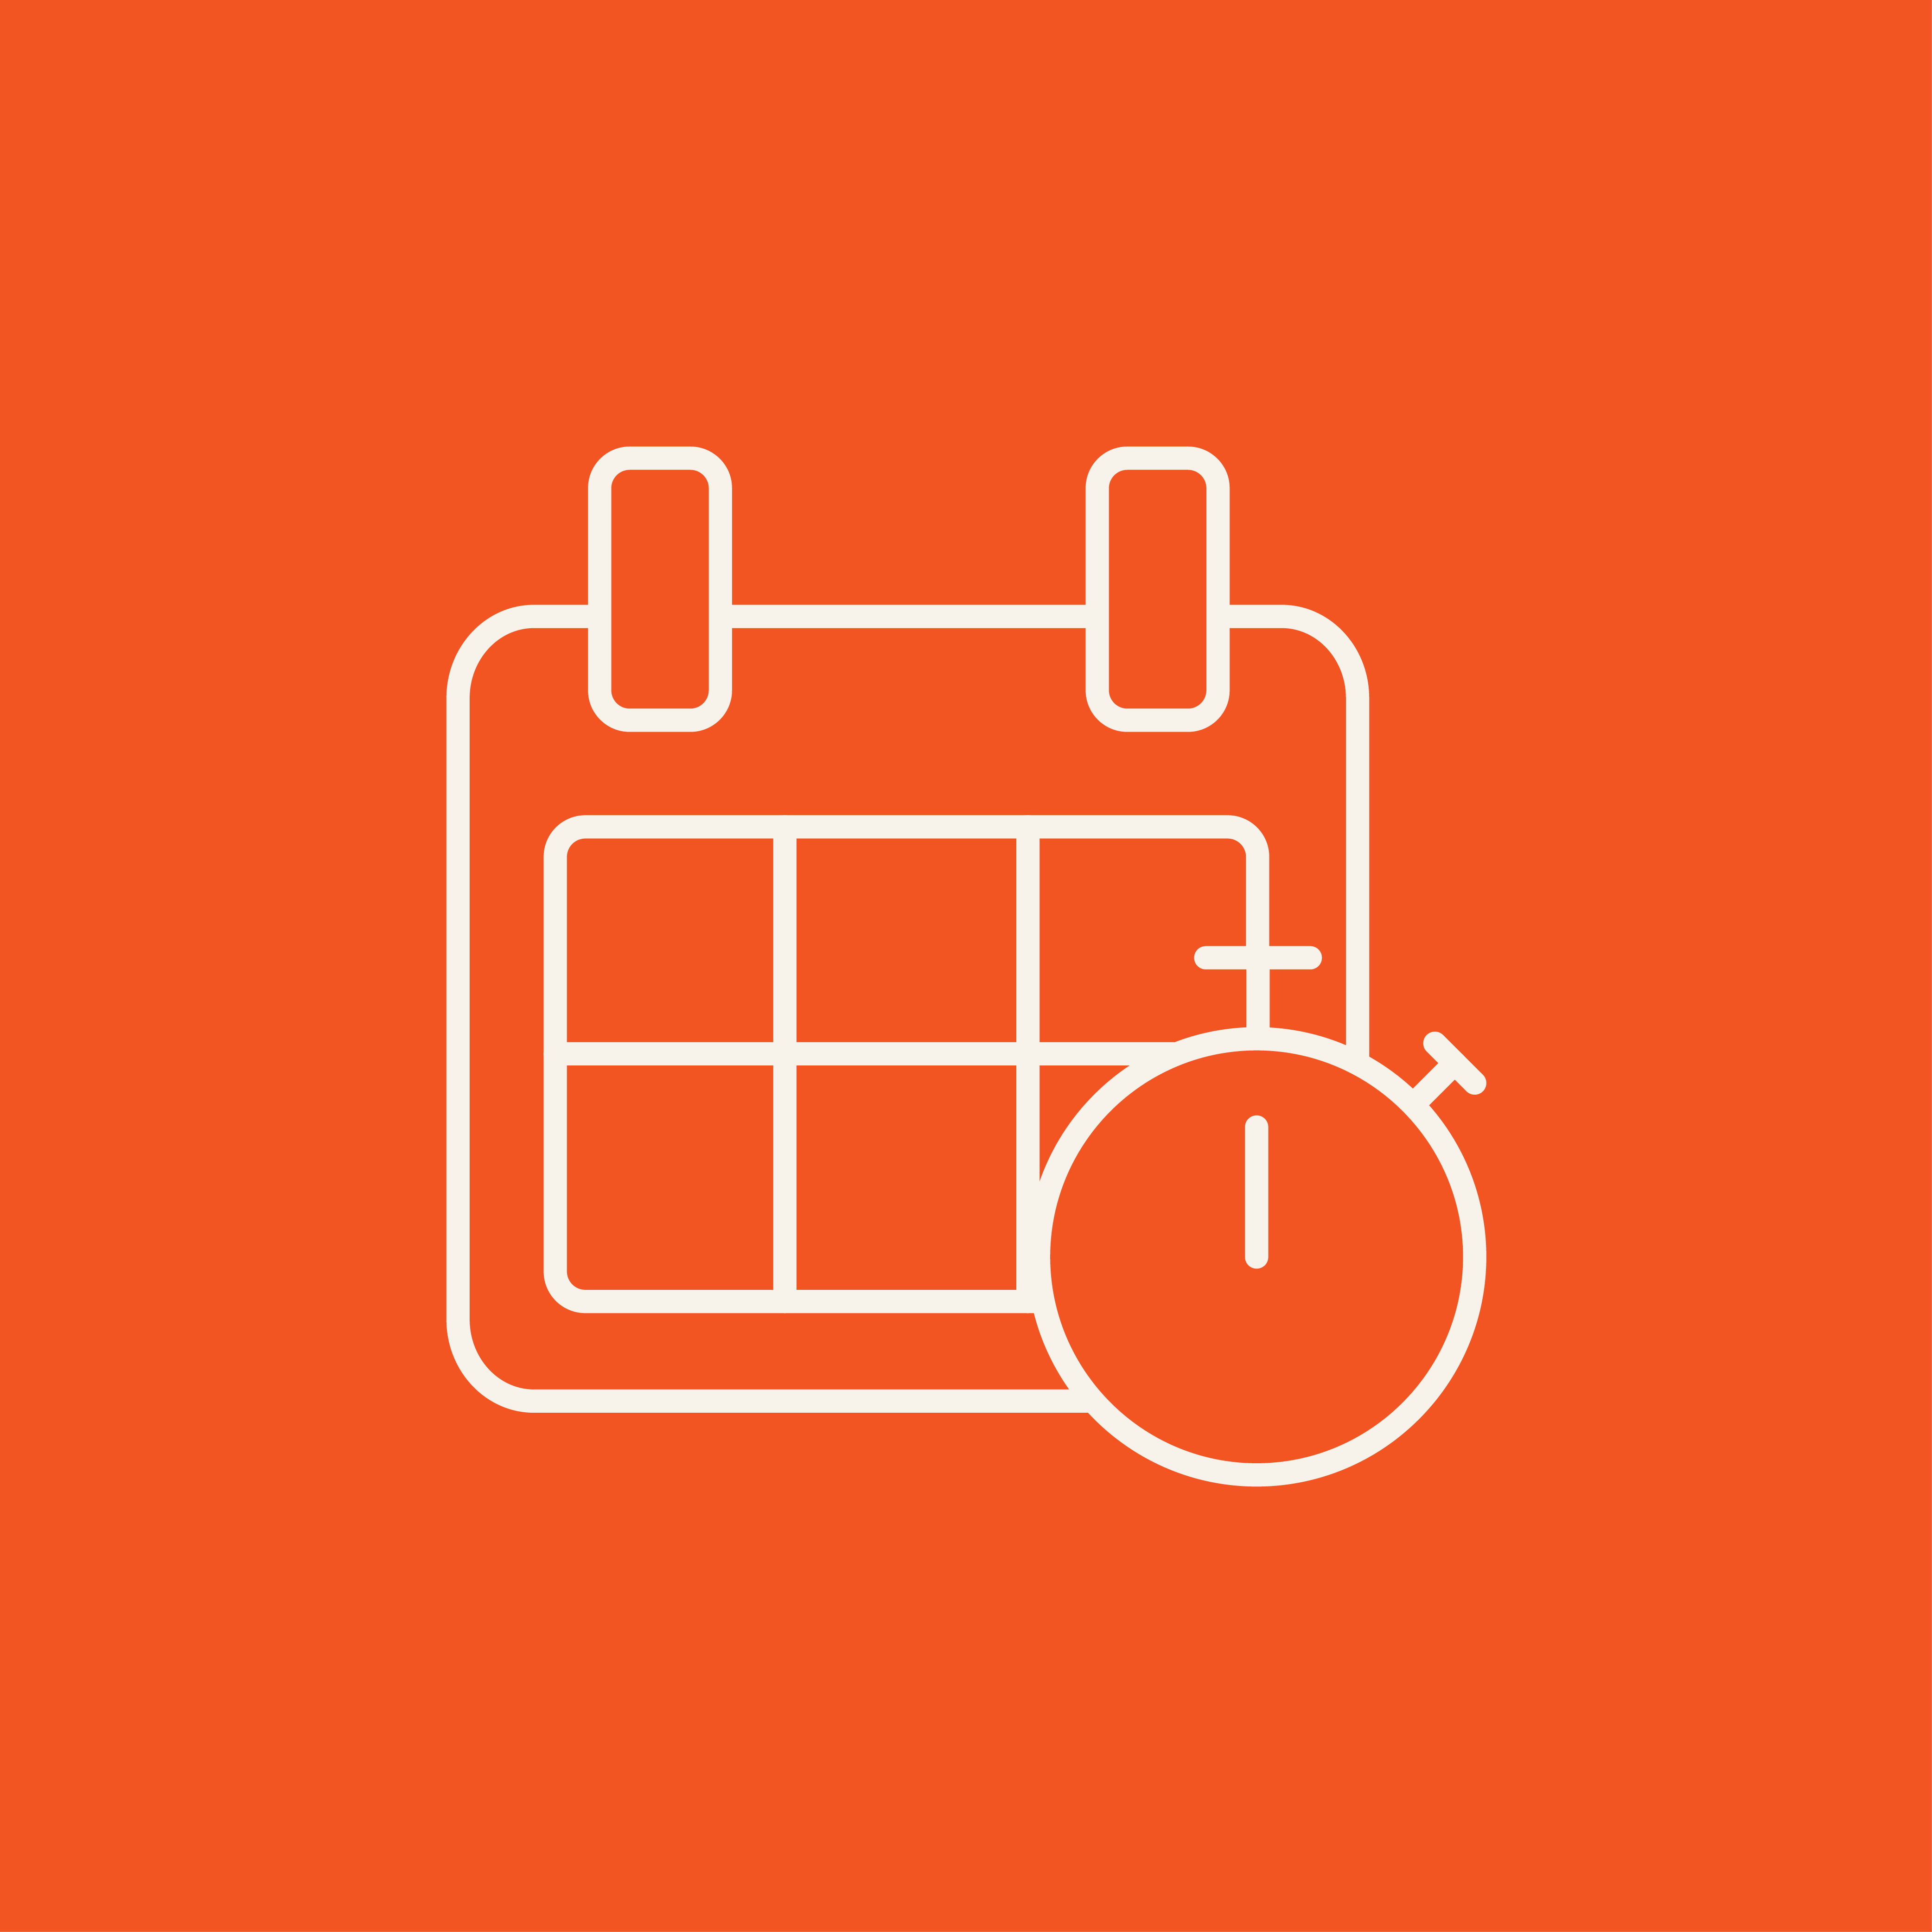 An outline of a calendar and a stopwatch in white on orange background.